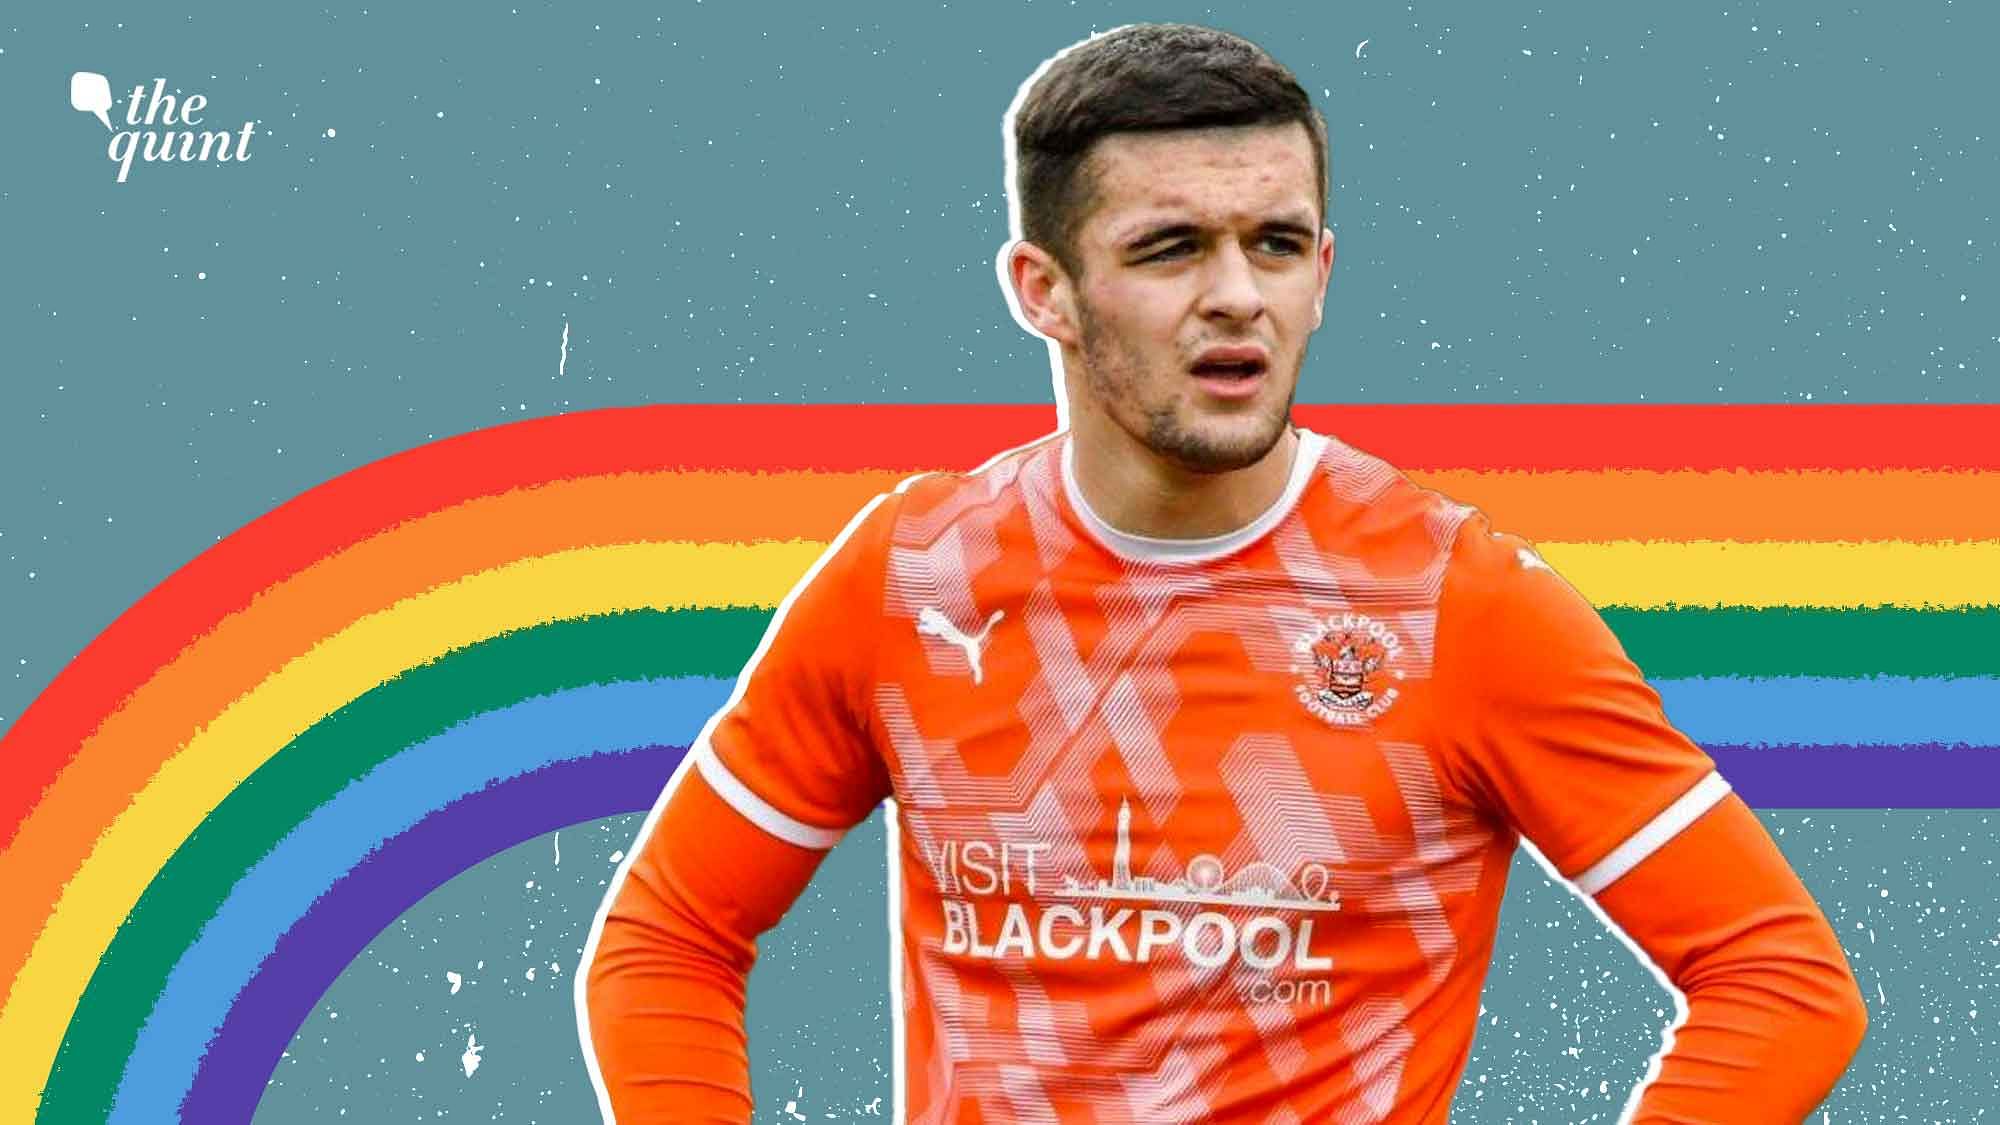 <div class="paragraphs"><p>Blackpool footballer Jake Daniels on Monday came out as gay, in a statement made through his football club.</p></div>